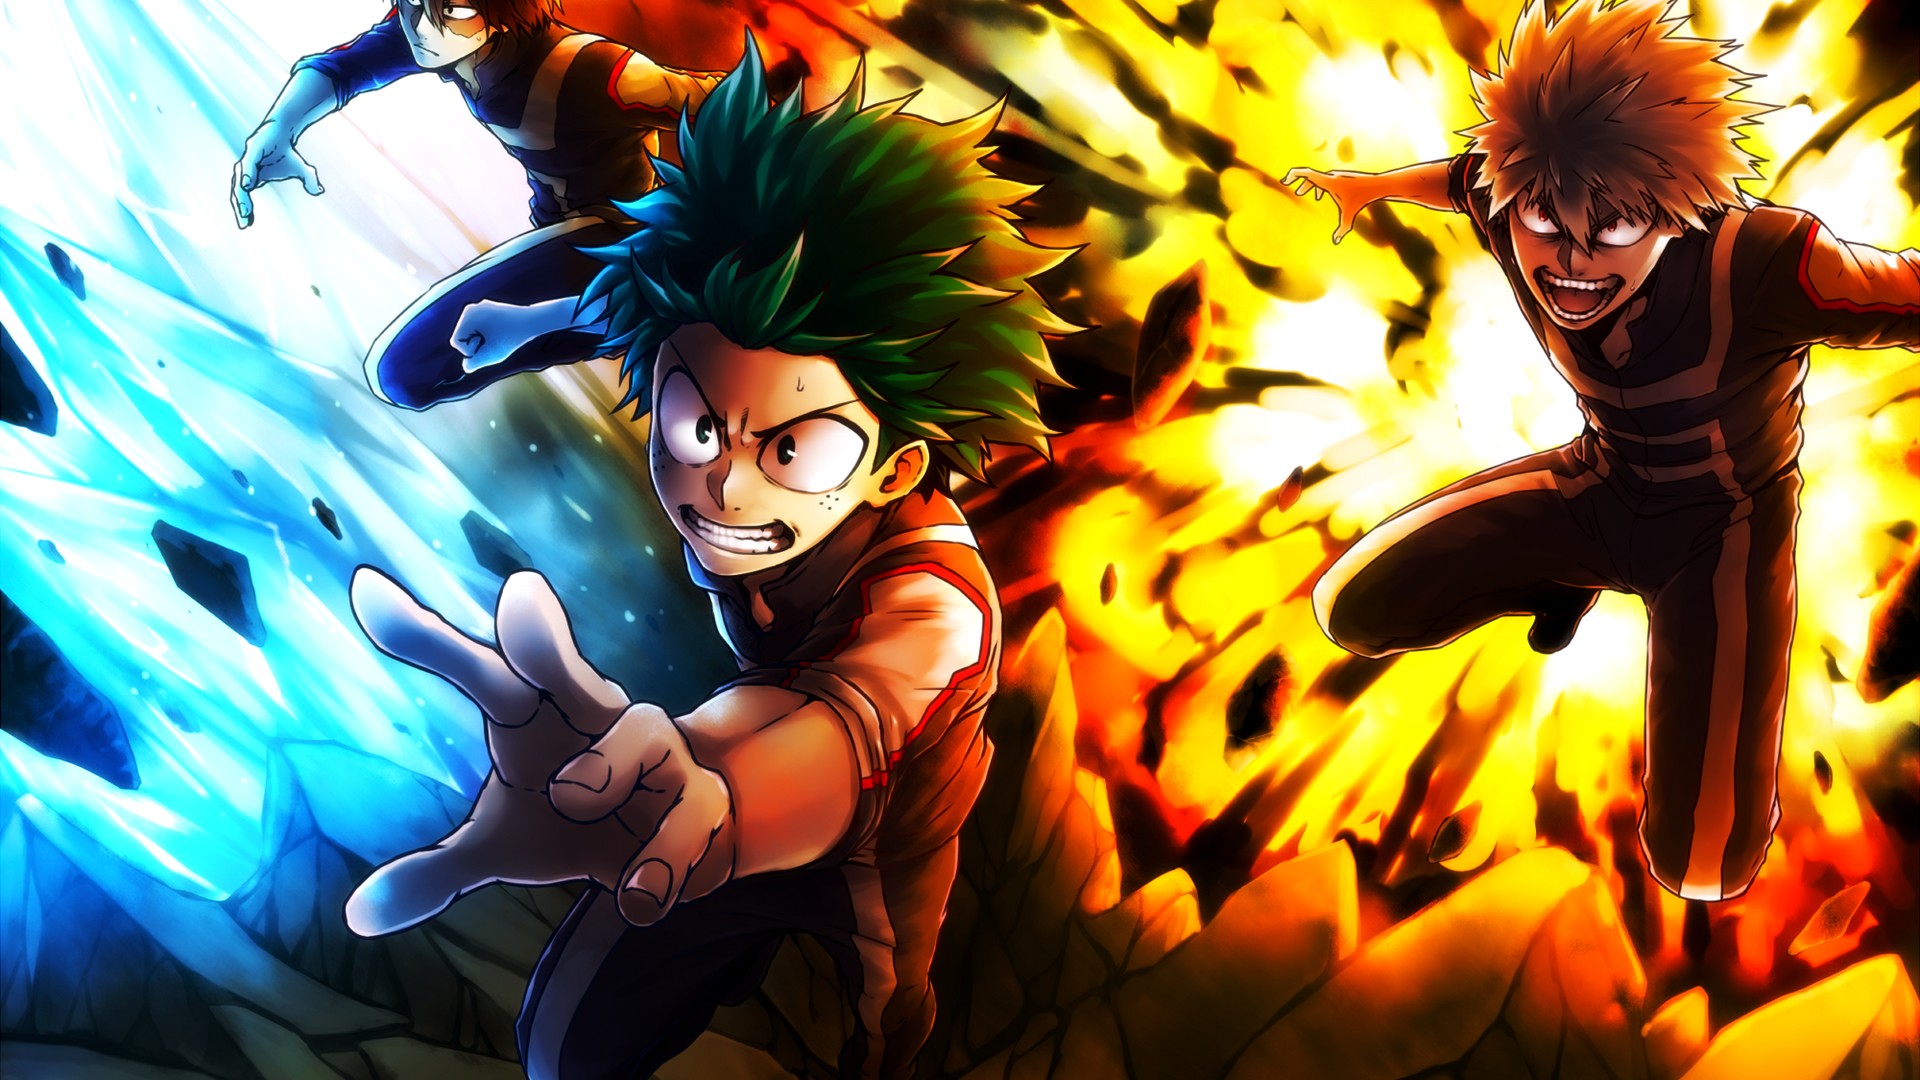 My Hero Academia Wallpaper For Desktop with high-resolution 1920x1080 pixel. You can use this poster wallpaper for your Desktop Computers, Mac Screensavers, Windows Backgrounds, iPhone Wallpapers, Tablet or Android Lock screen and another Mobile device